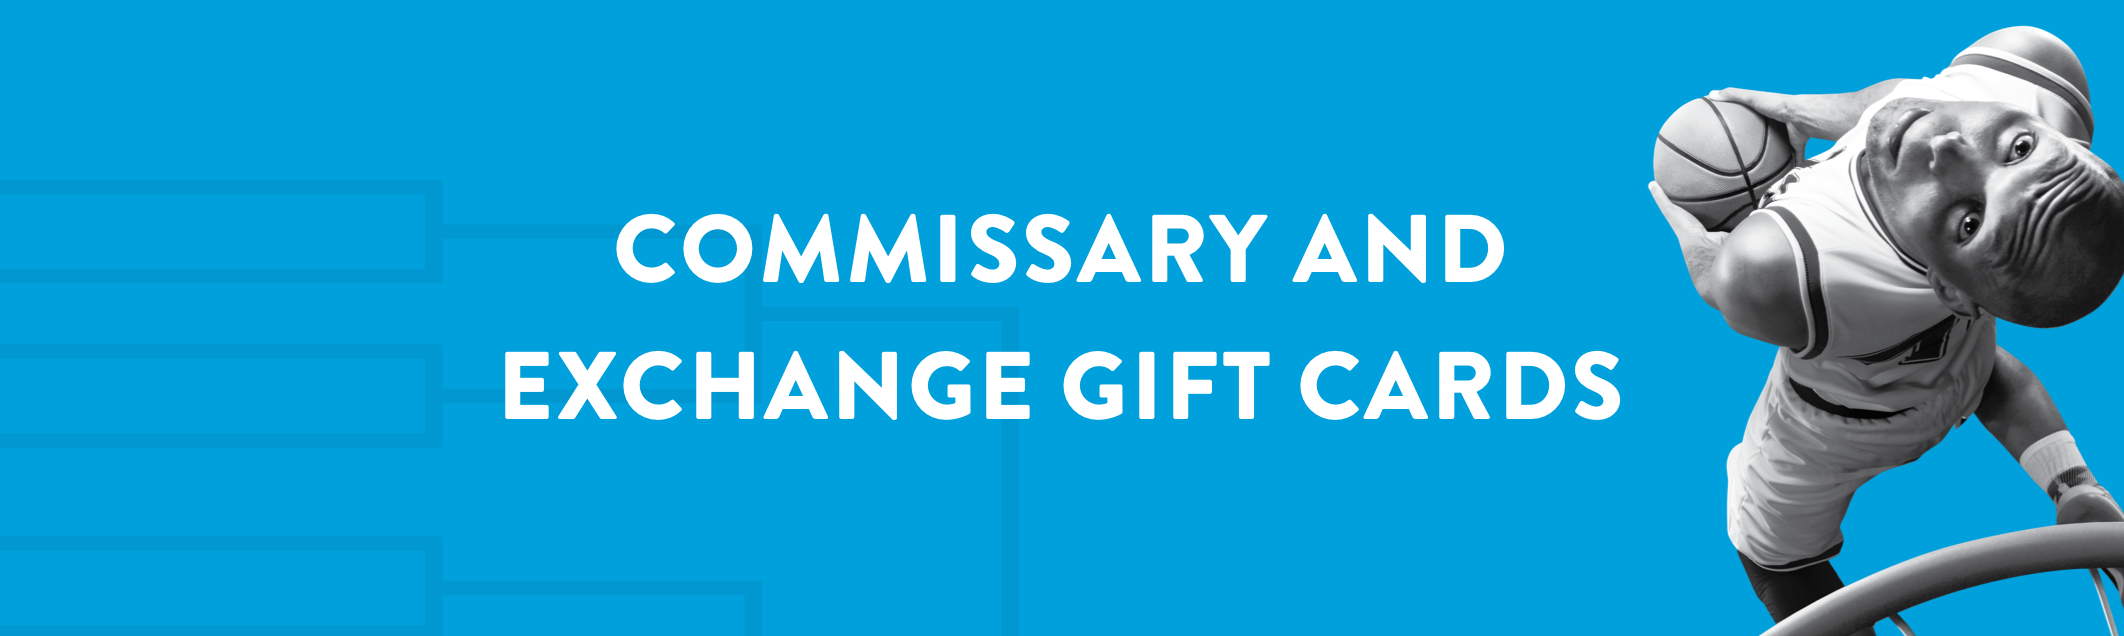 Commissary and Exchange Gift Banner